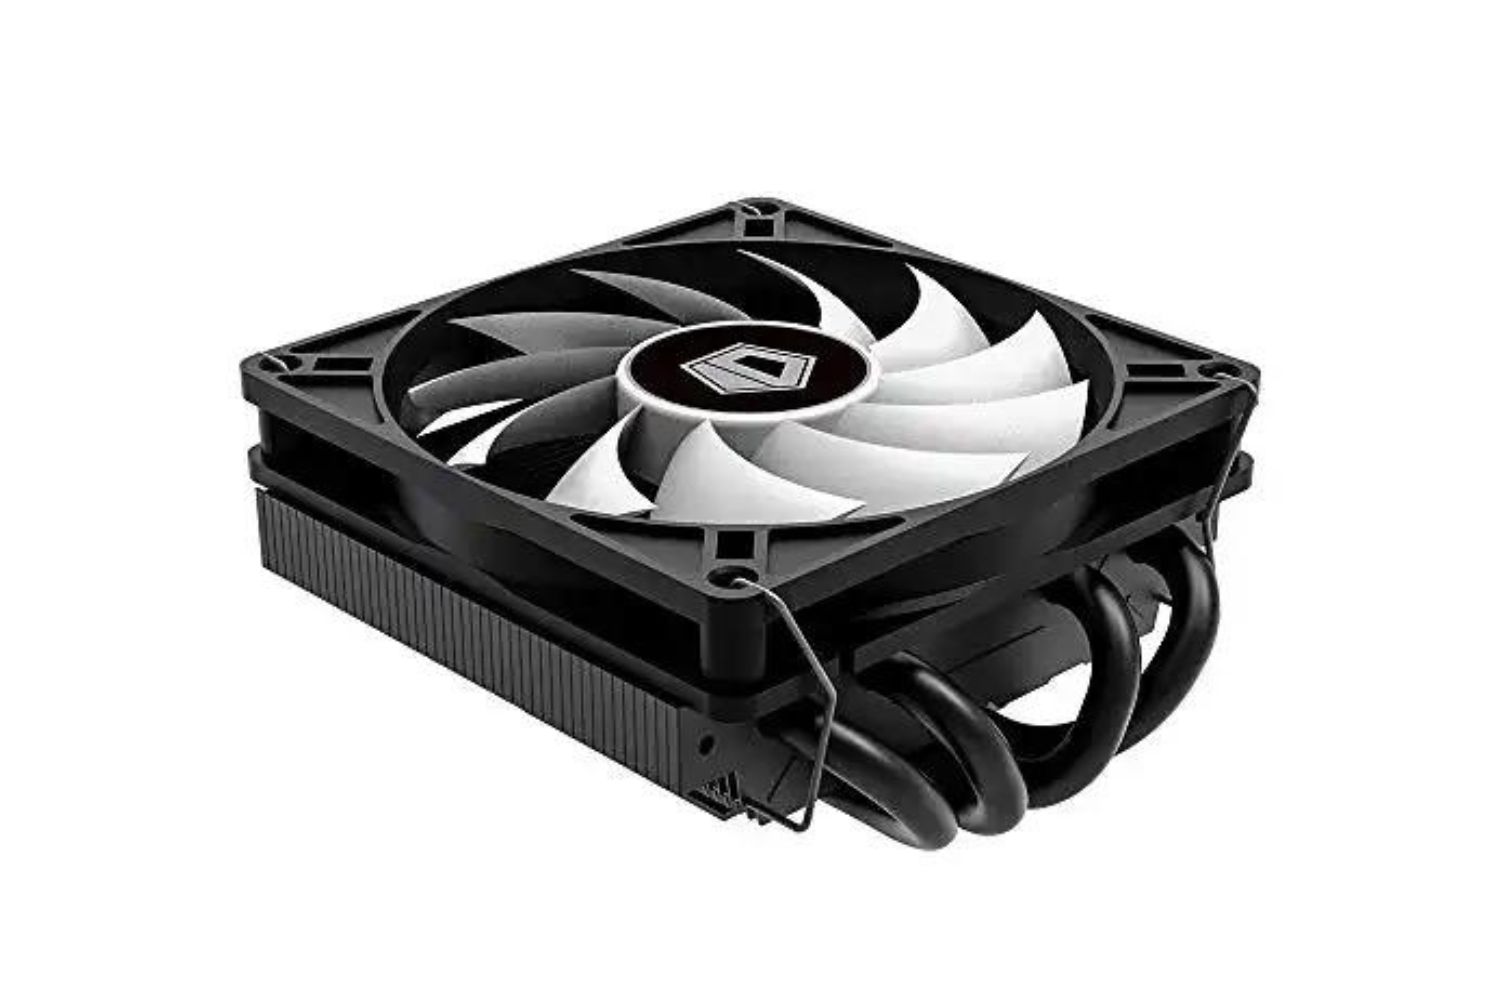 How Many Watts Does CPU Cooler Use